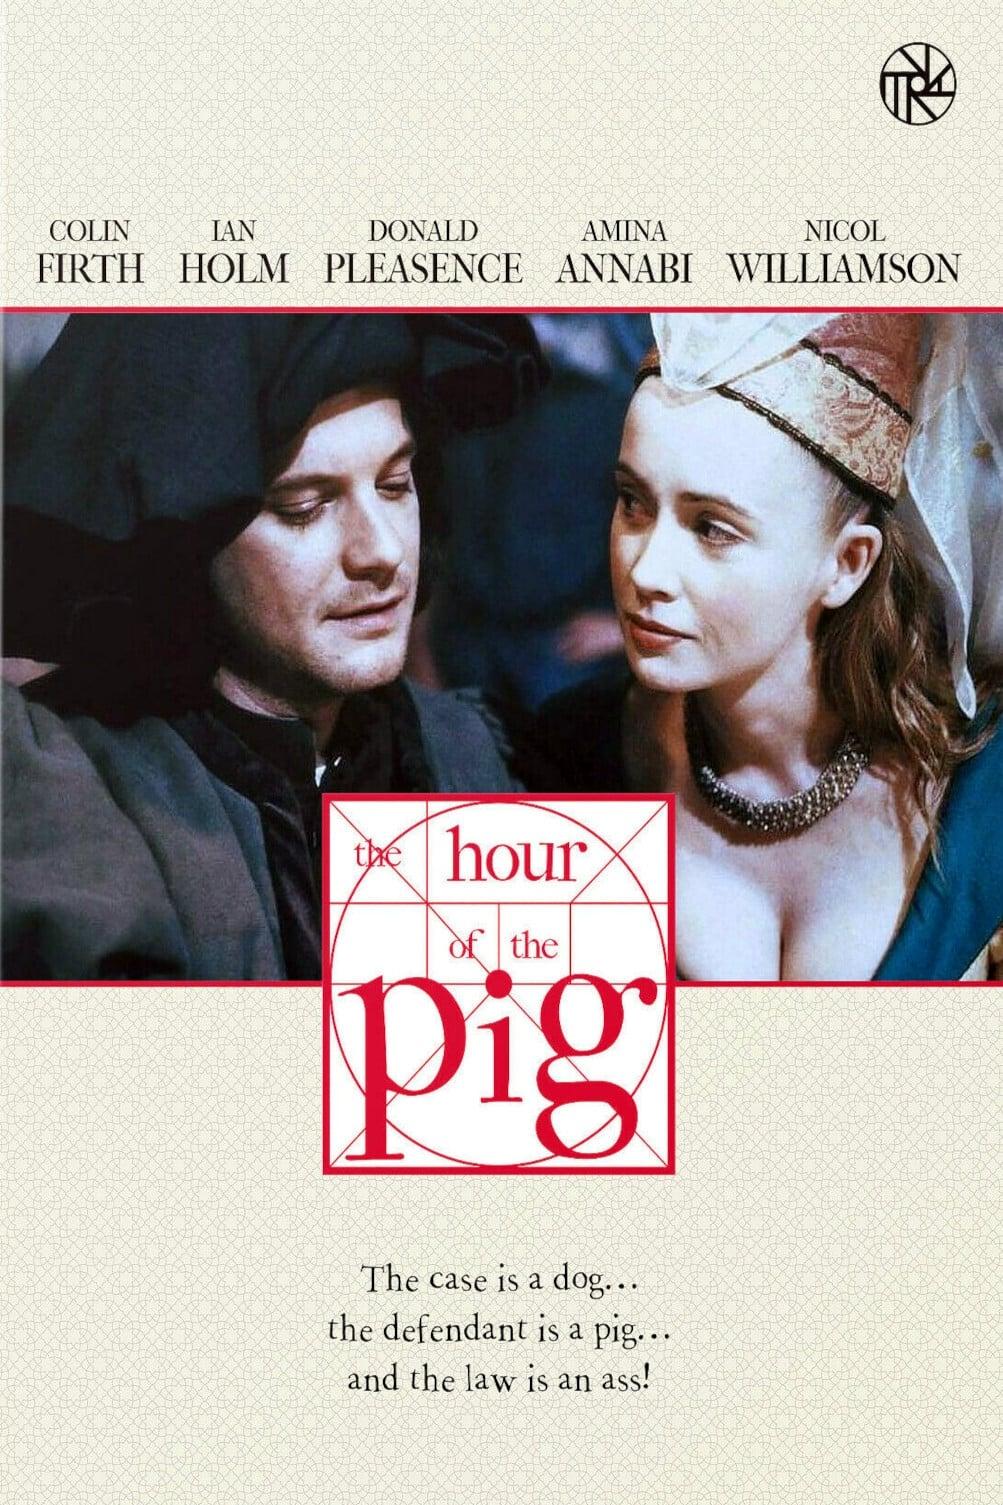 The Hour of the Pig poster